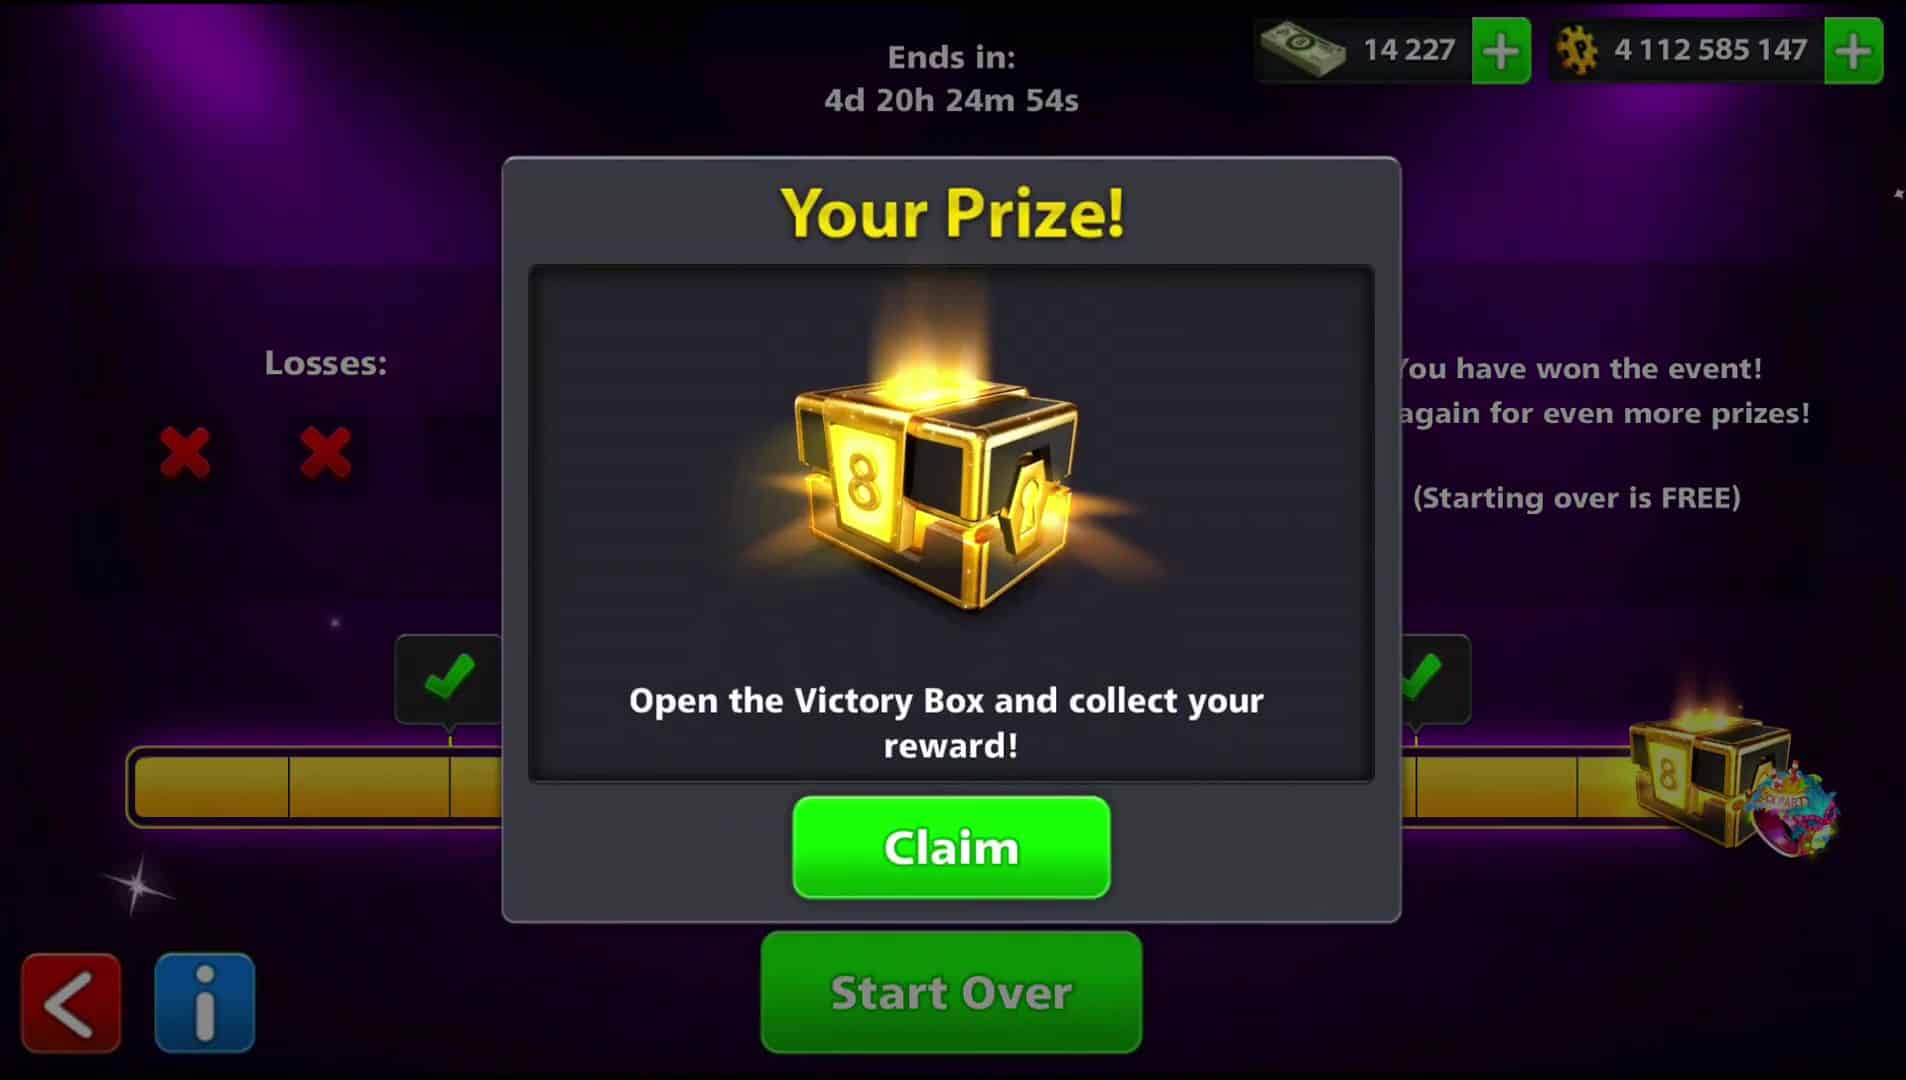 8 Ball Pool Free Cue Trick (Max Level) - Latest 100% Working